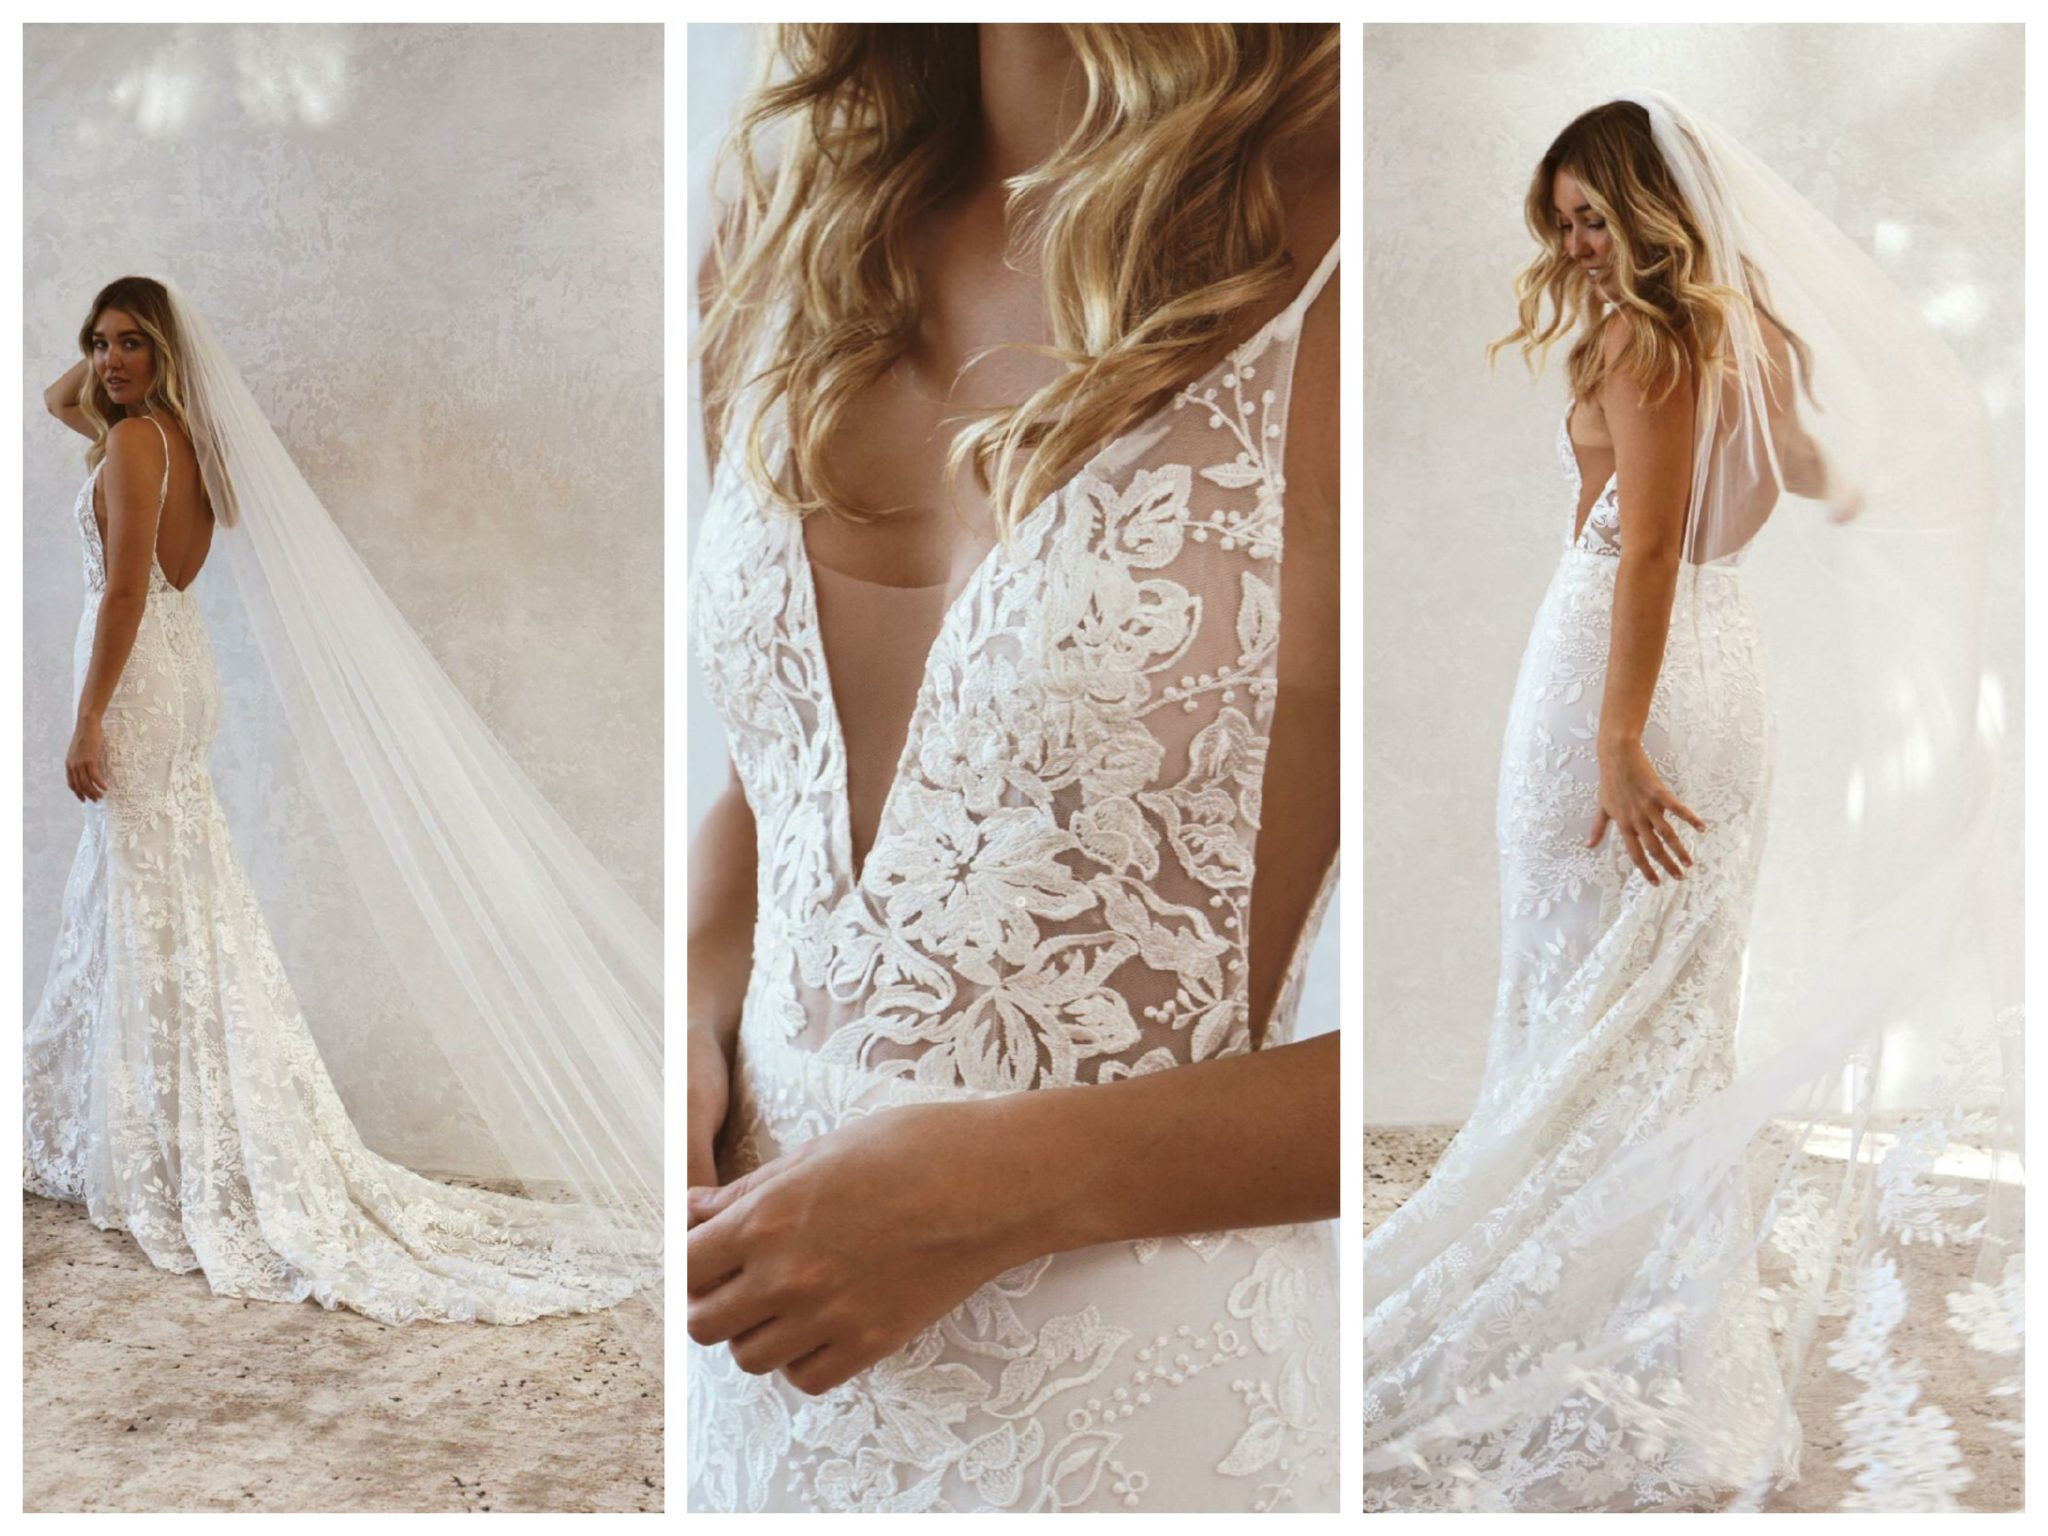 Wedding dresses for broad shoulders by top Los Angeles bridal shop, Love and Lace Bridal Salon: Emmy Mae Bridal's Peony